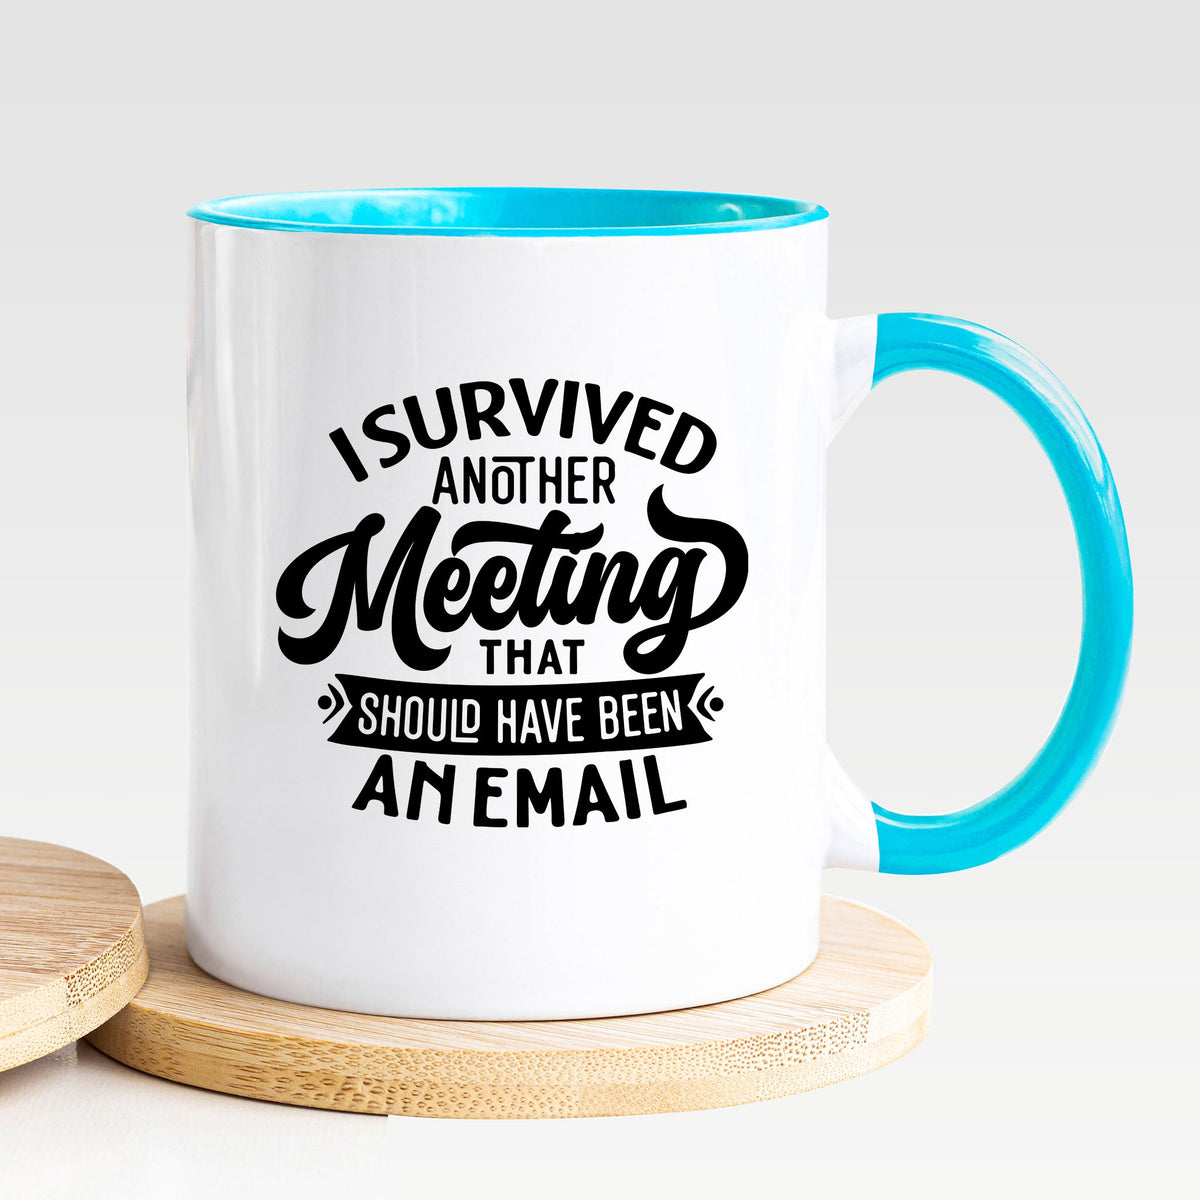 I Survived Another Meeting That Should Have Been An Email - Mug